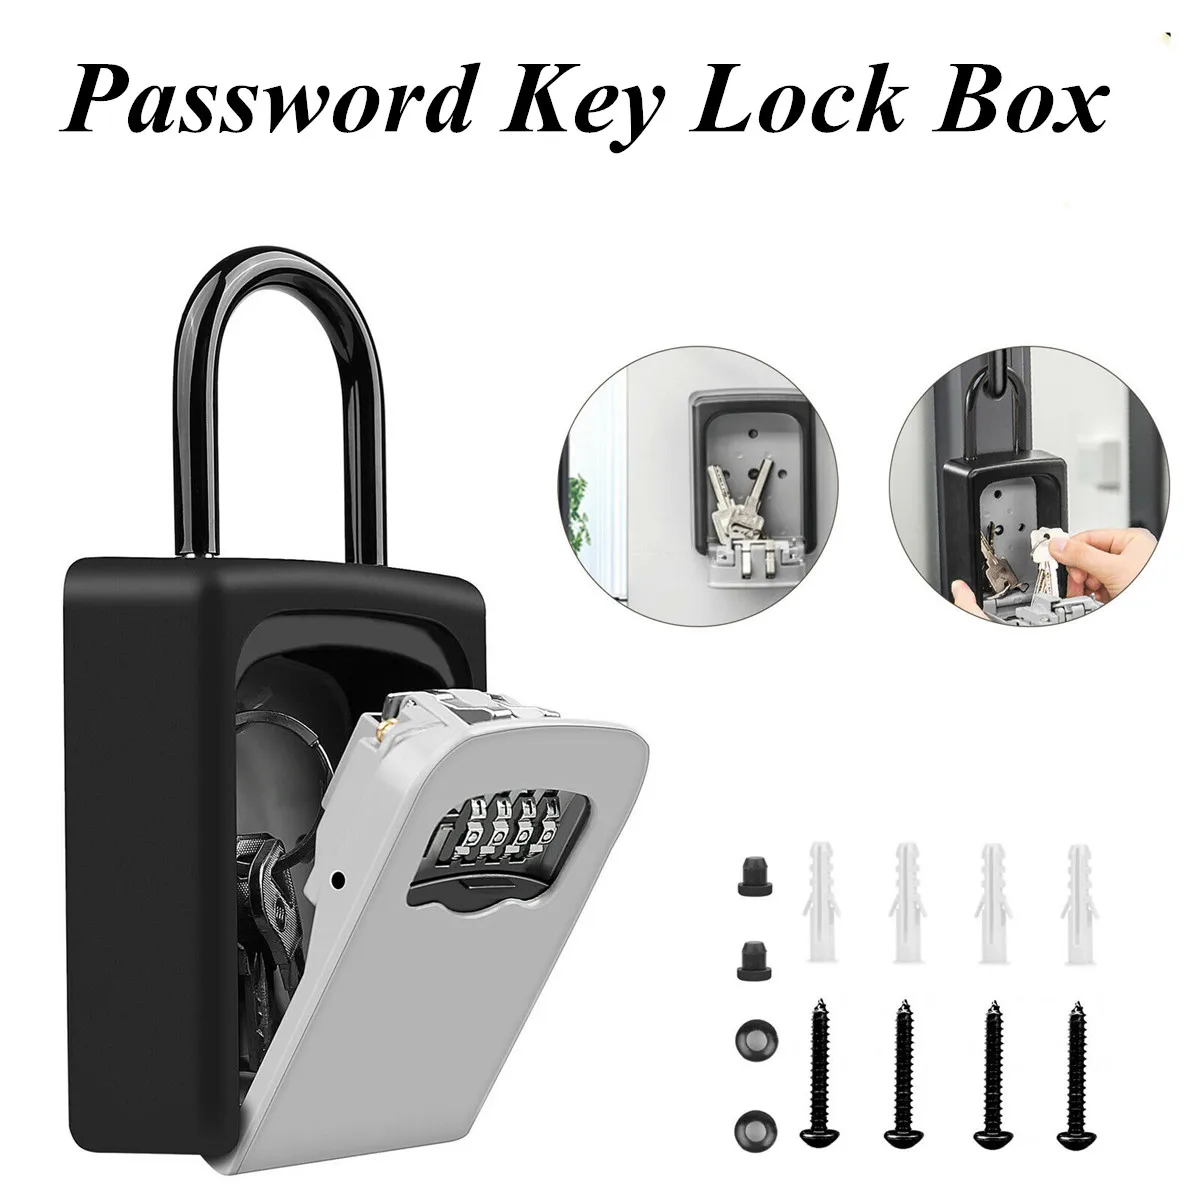 1x Wall Mounted 4-Digit Combination Password Key Lock Storage Box Home Room Safe 